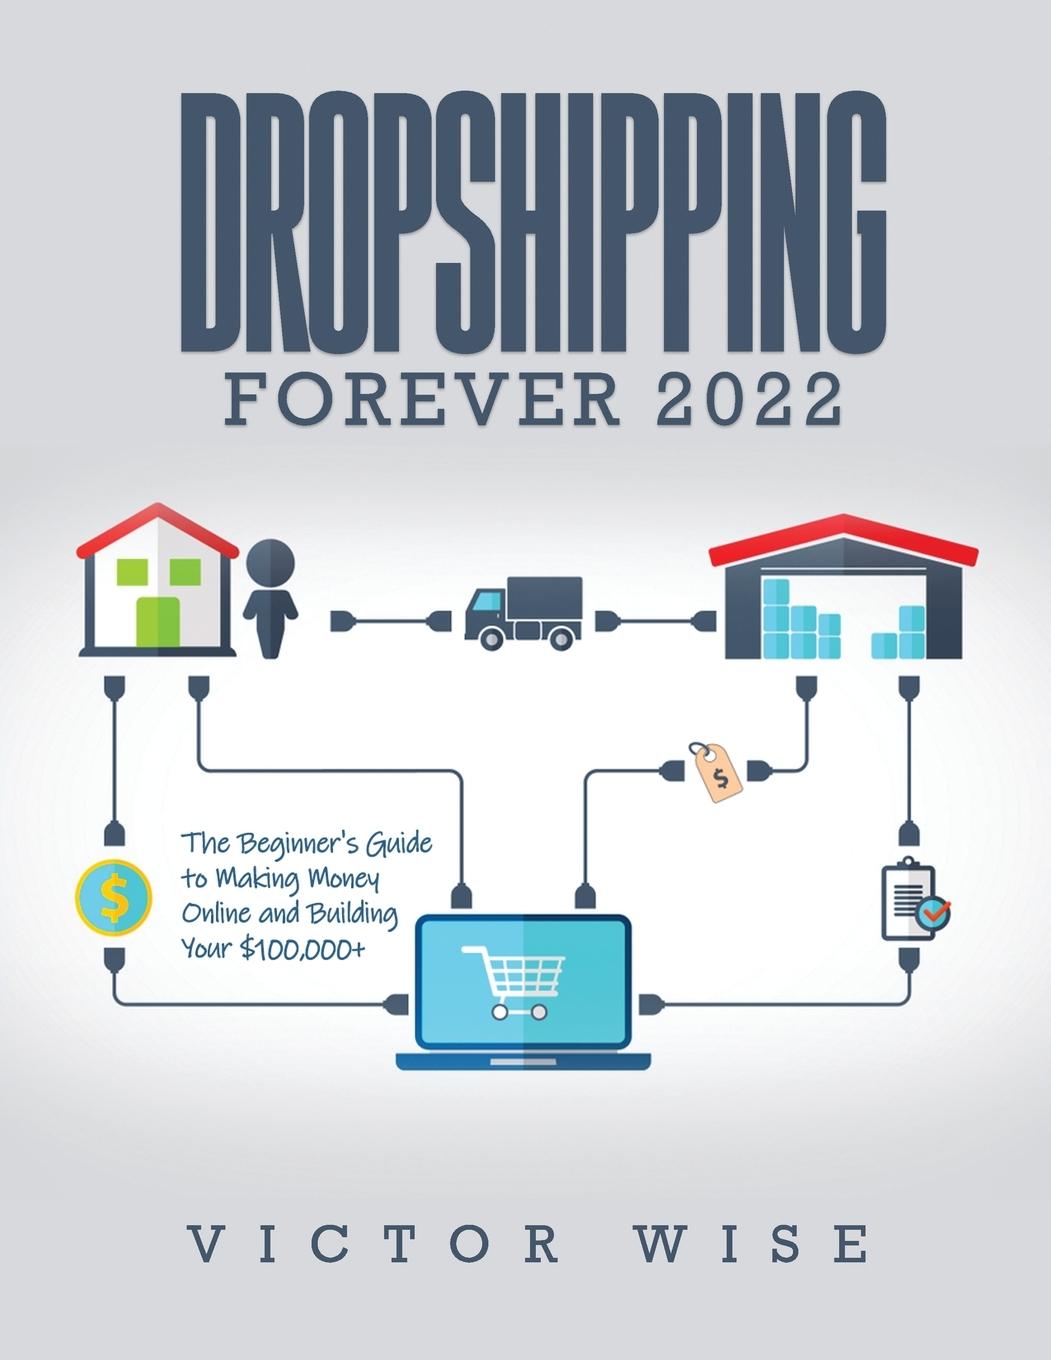 Book Dropshipping Forever 2022 